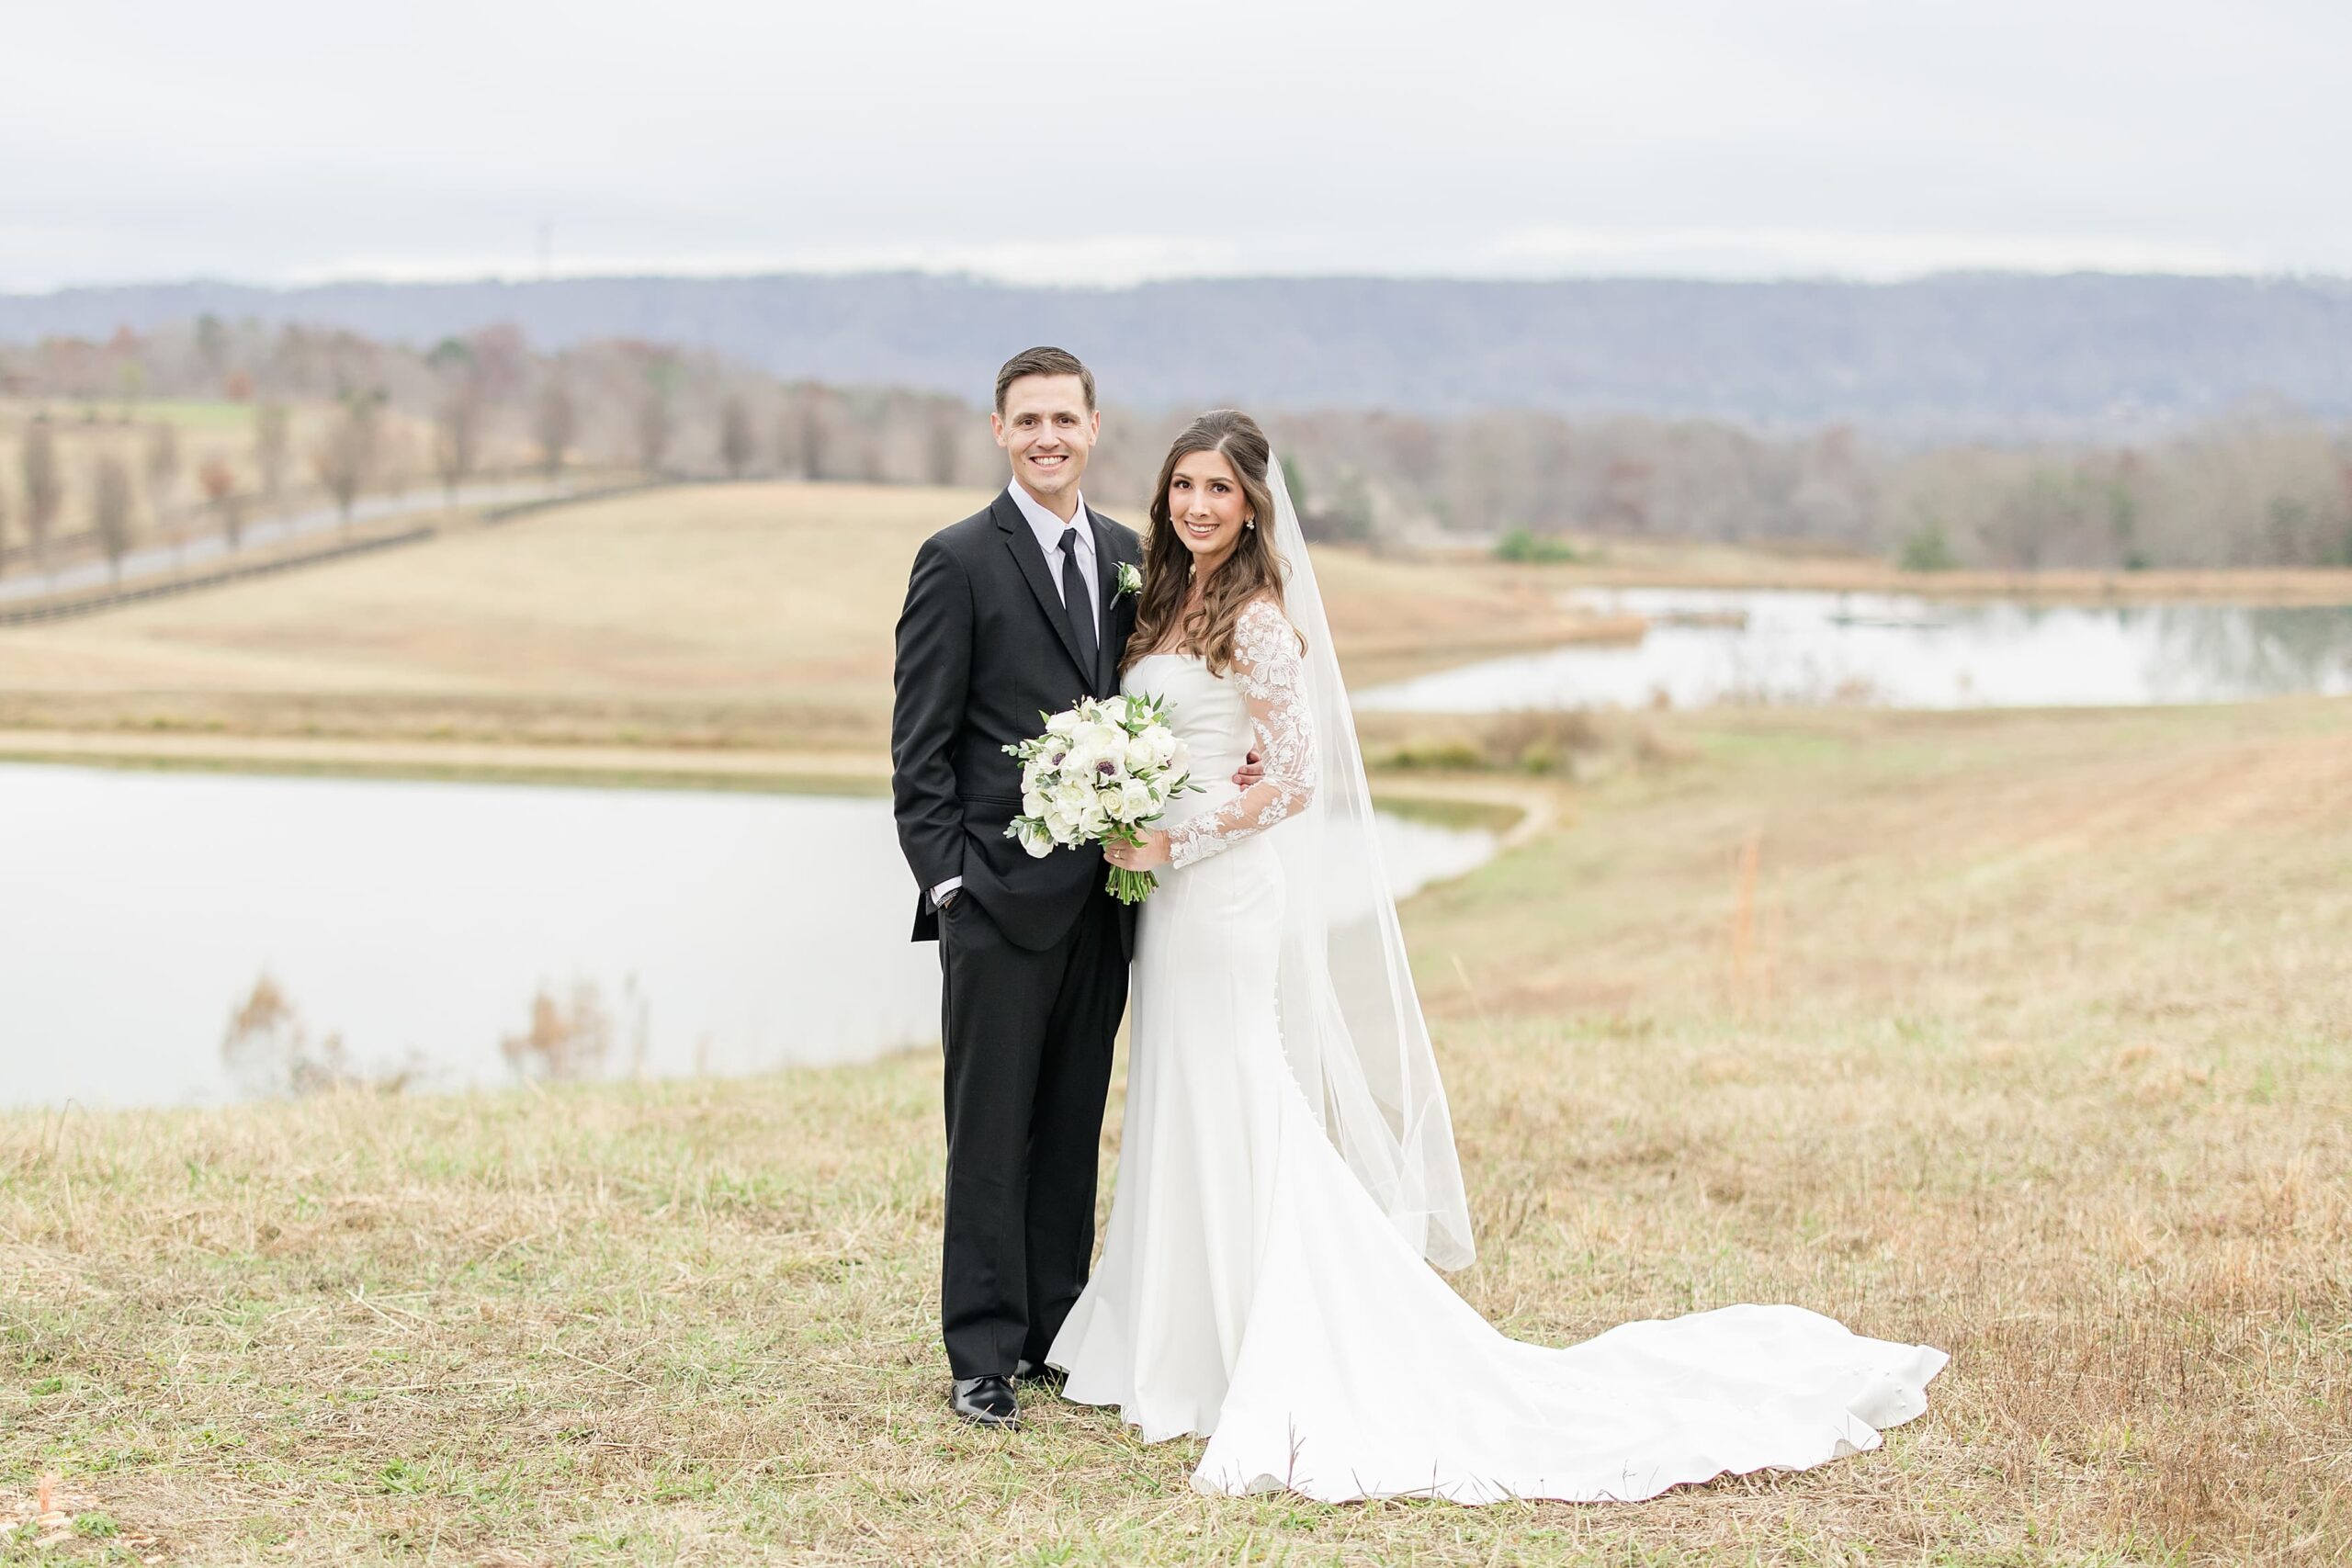 Howe Farms Chapel Wedding in Chattanooga Tennessee - Katie & Alec Photography and Videography Birmingham, Alabama Wedding Photographers